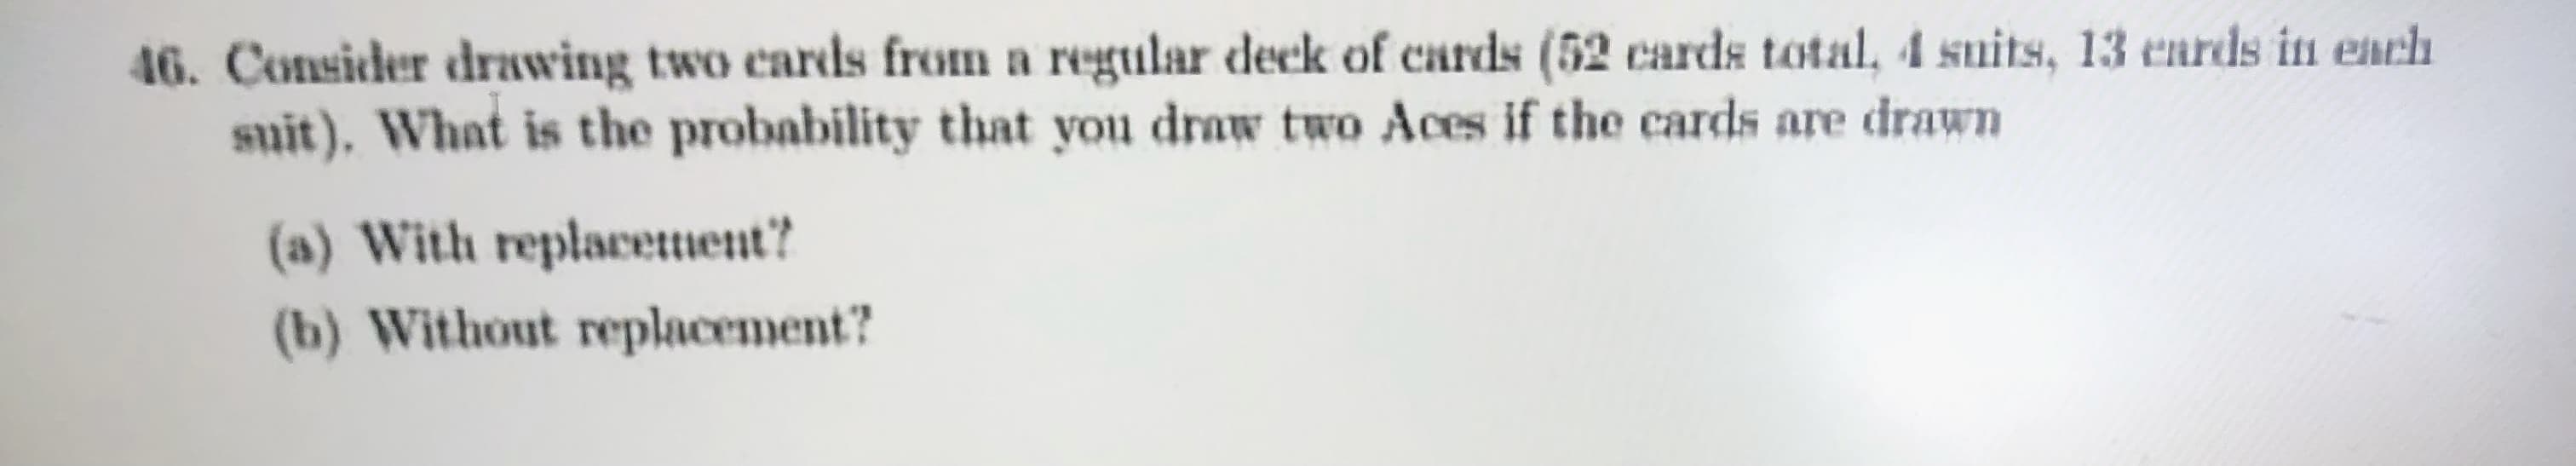 46. Consider drawing two cards from a regular declk of cards (52 cards total, 4 suits, 13 eards in each
suit), What is the probability that you draw two Aces if the cards are drawn
(a) With replacettient?
(b) Without replacement?
